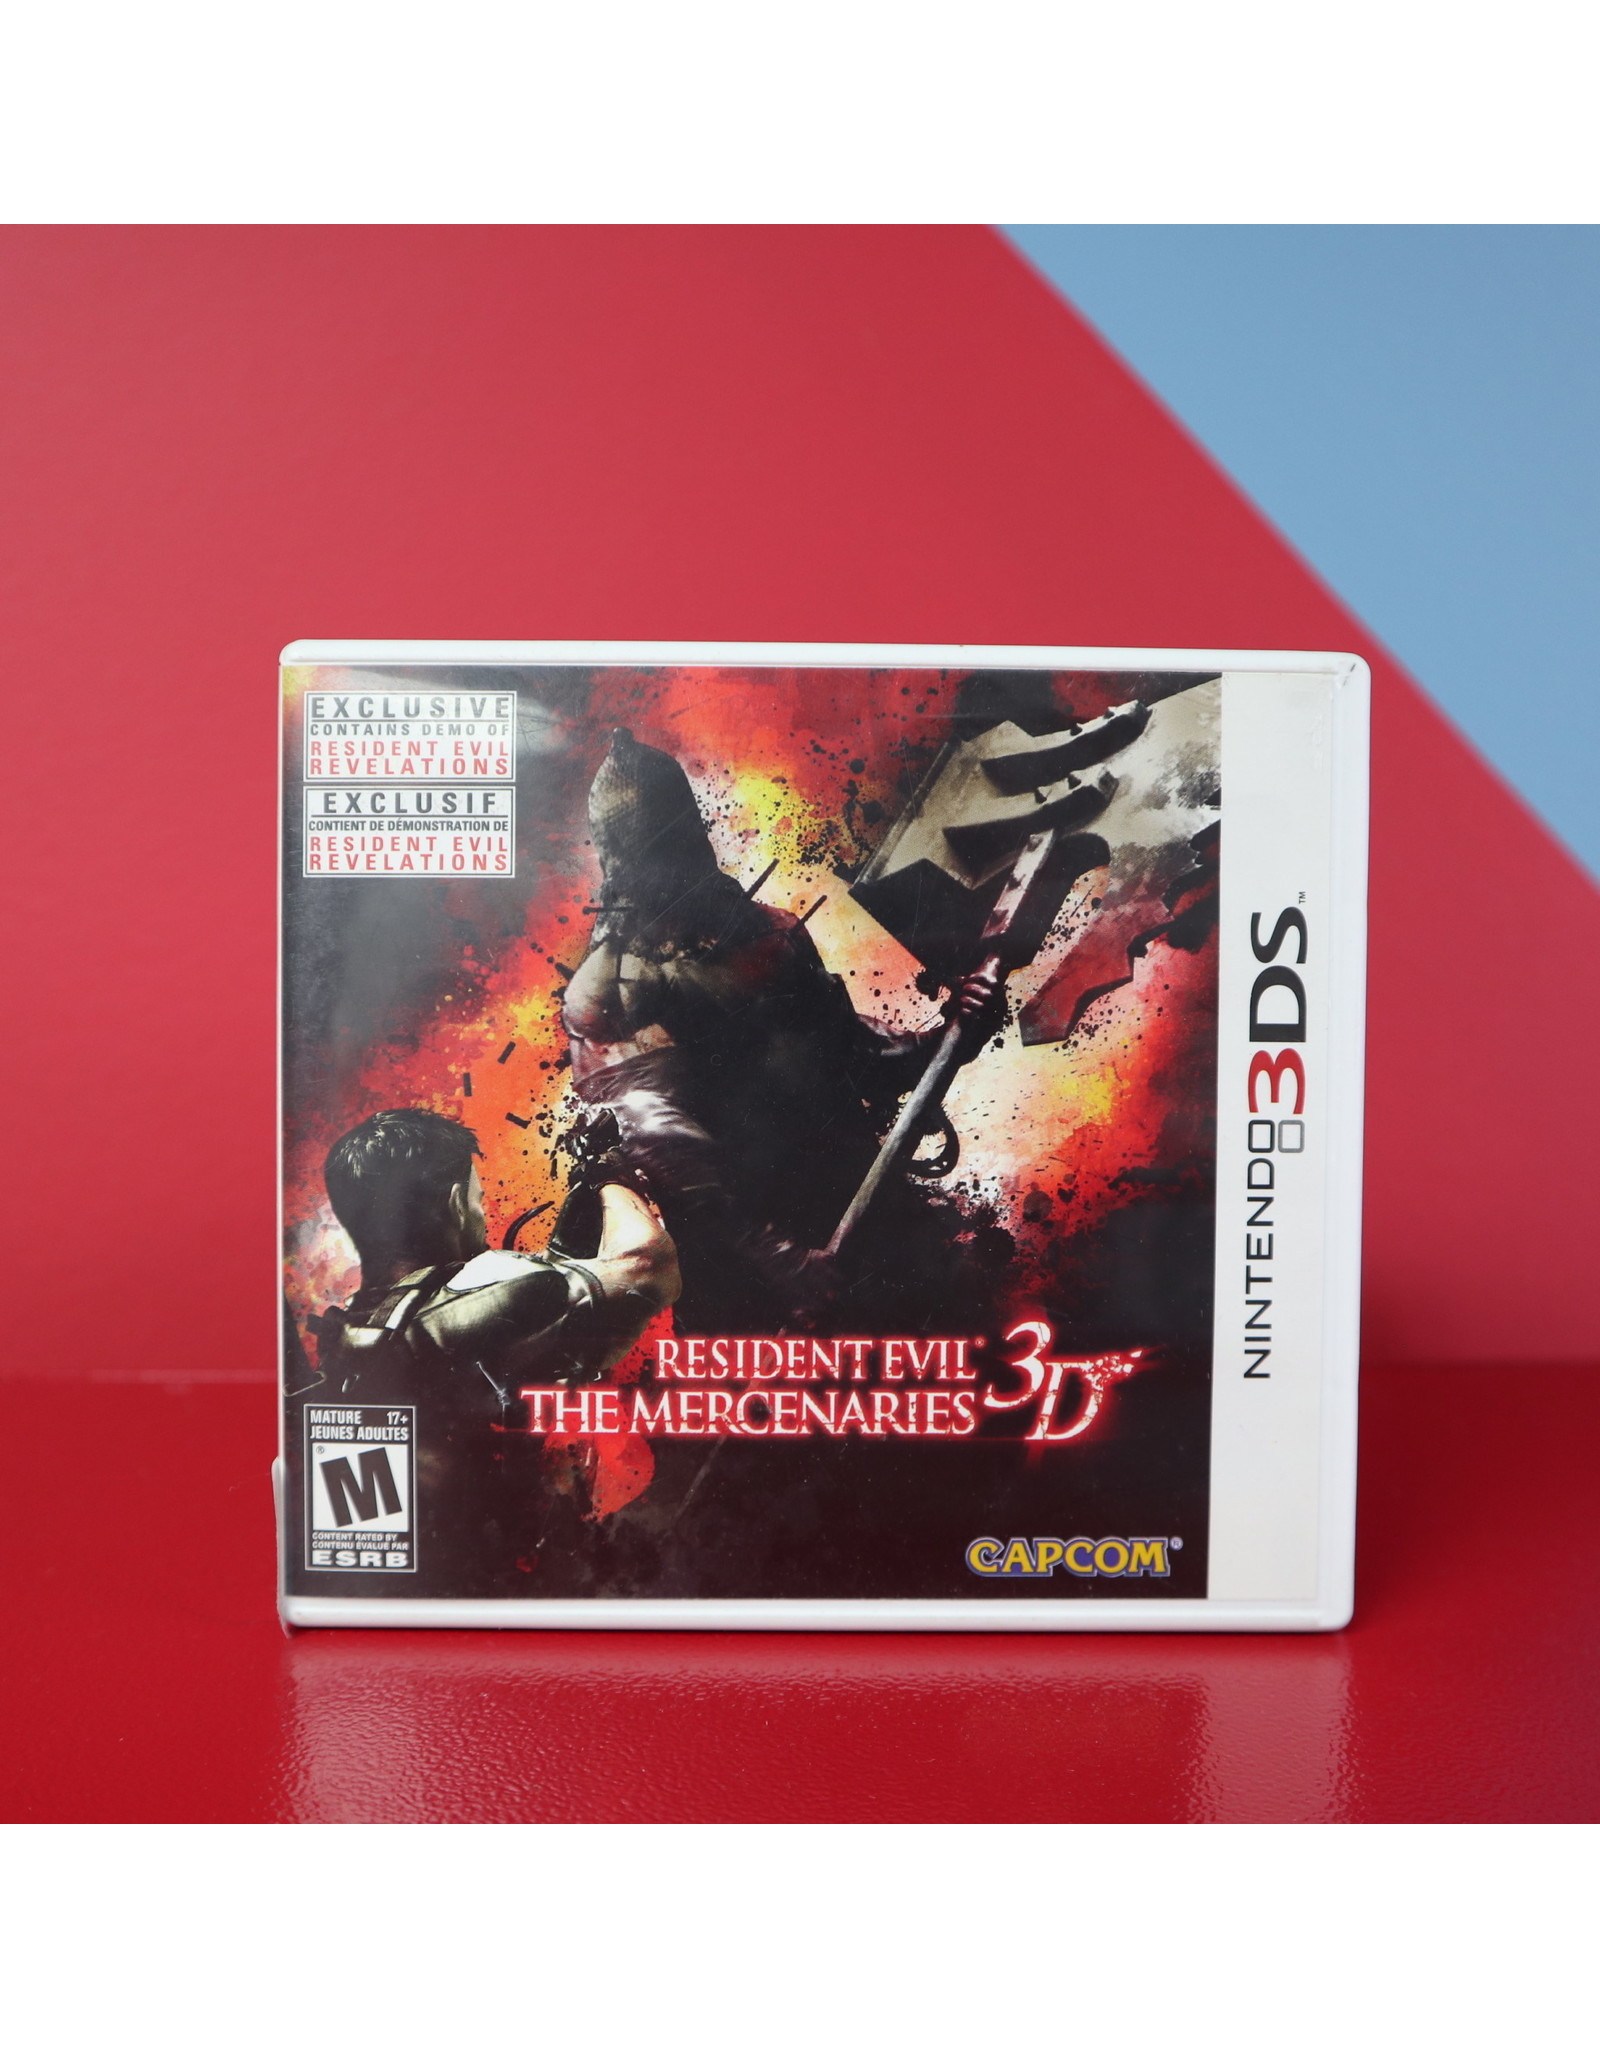 **CLEARANCE** Used Game - Nintendo 3DS - Resident Evil: The Mercenaries 3D [CIB]